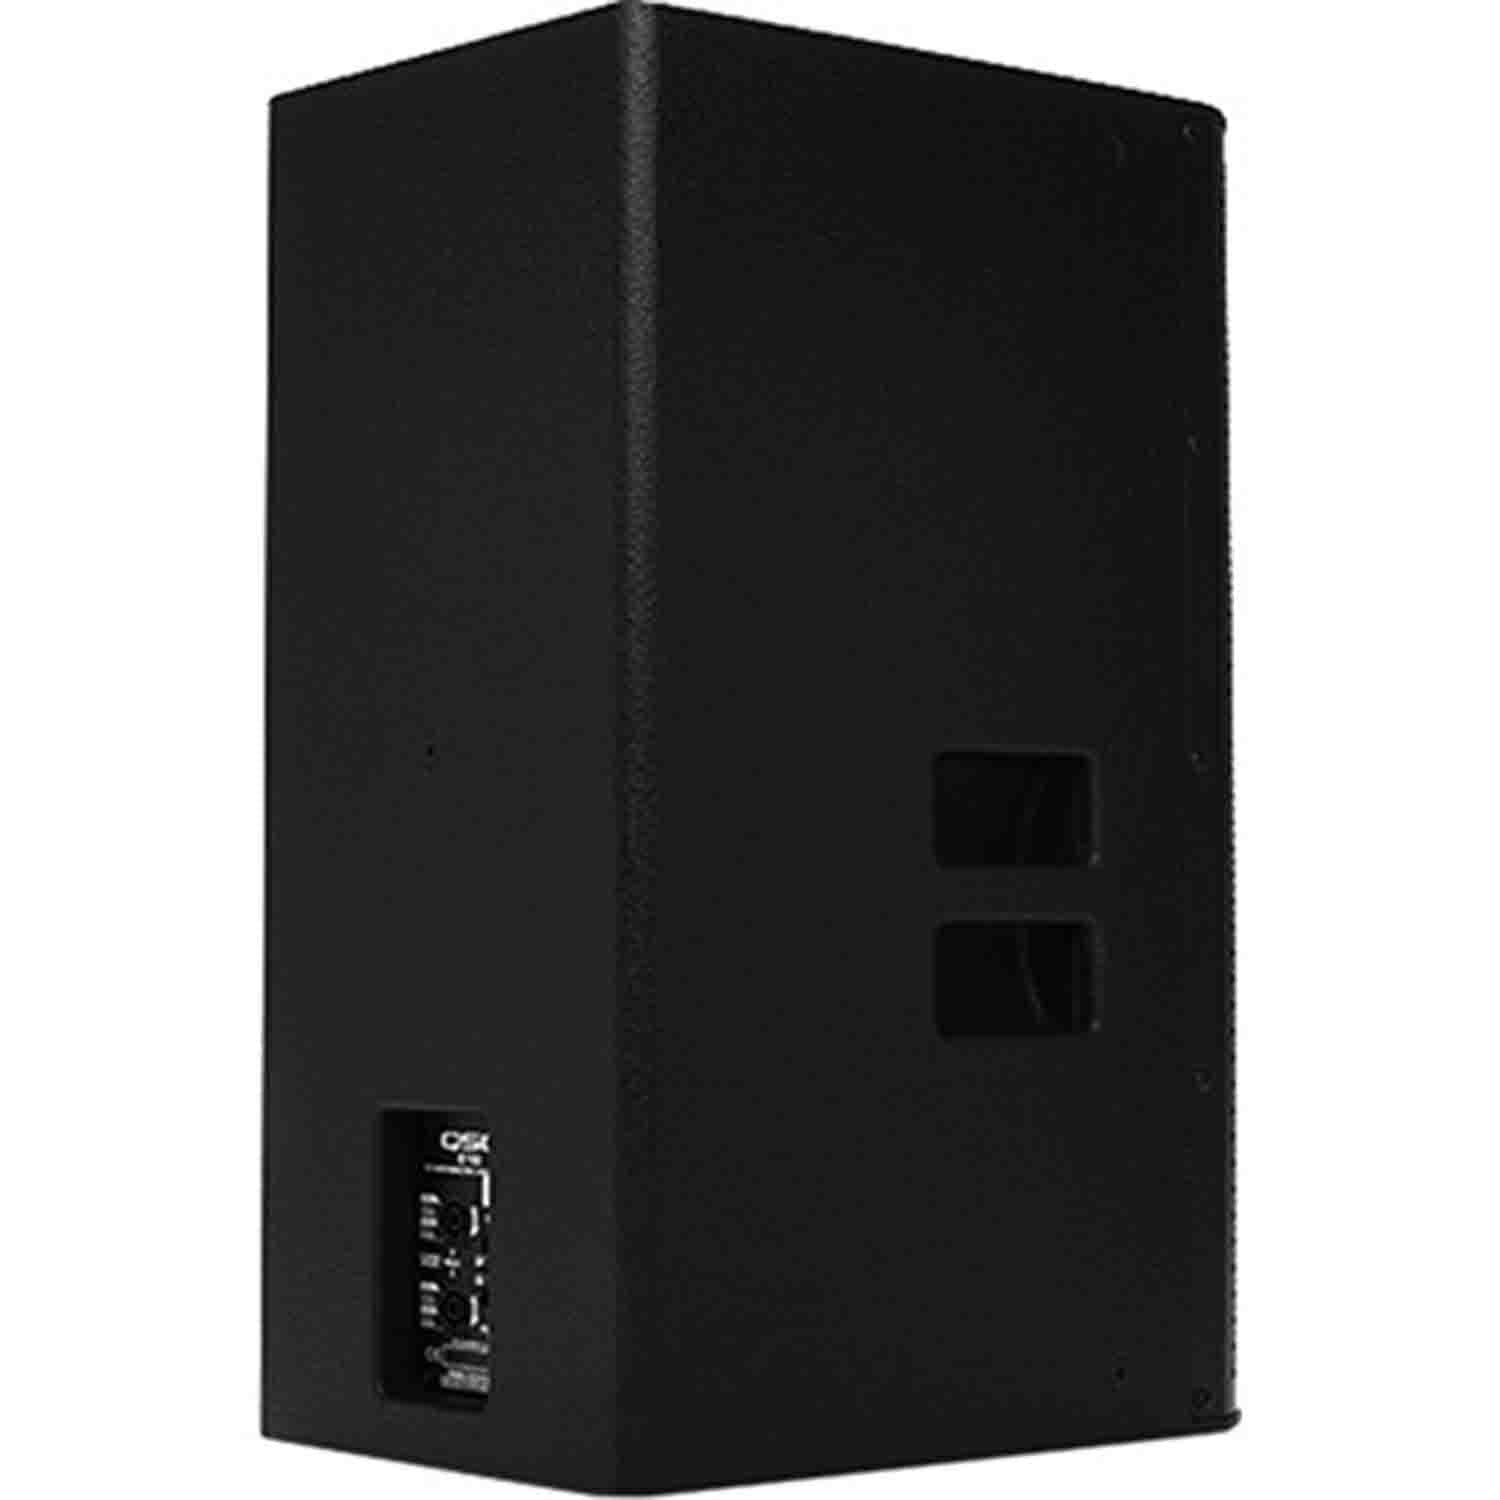 QSC E115, 15 Inches 2-Way Externally Powered, Live Sound Reinforcement Loud Speaker - Black - Hollywood DJ